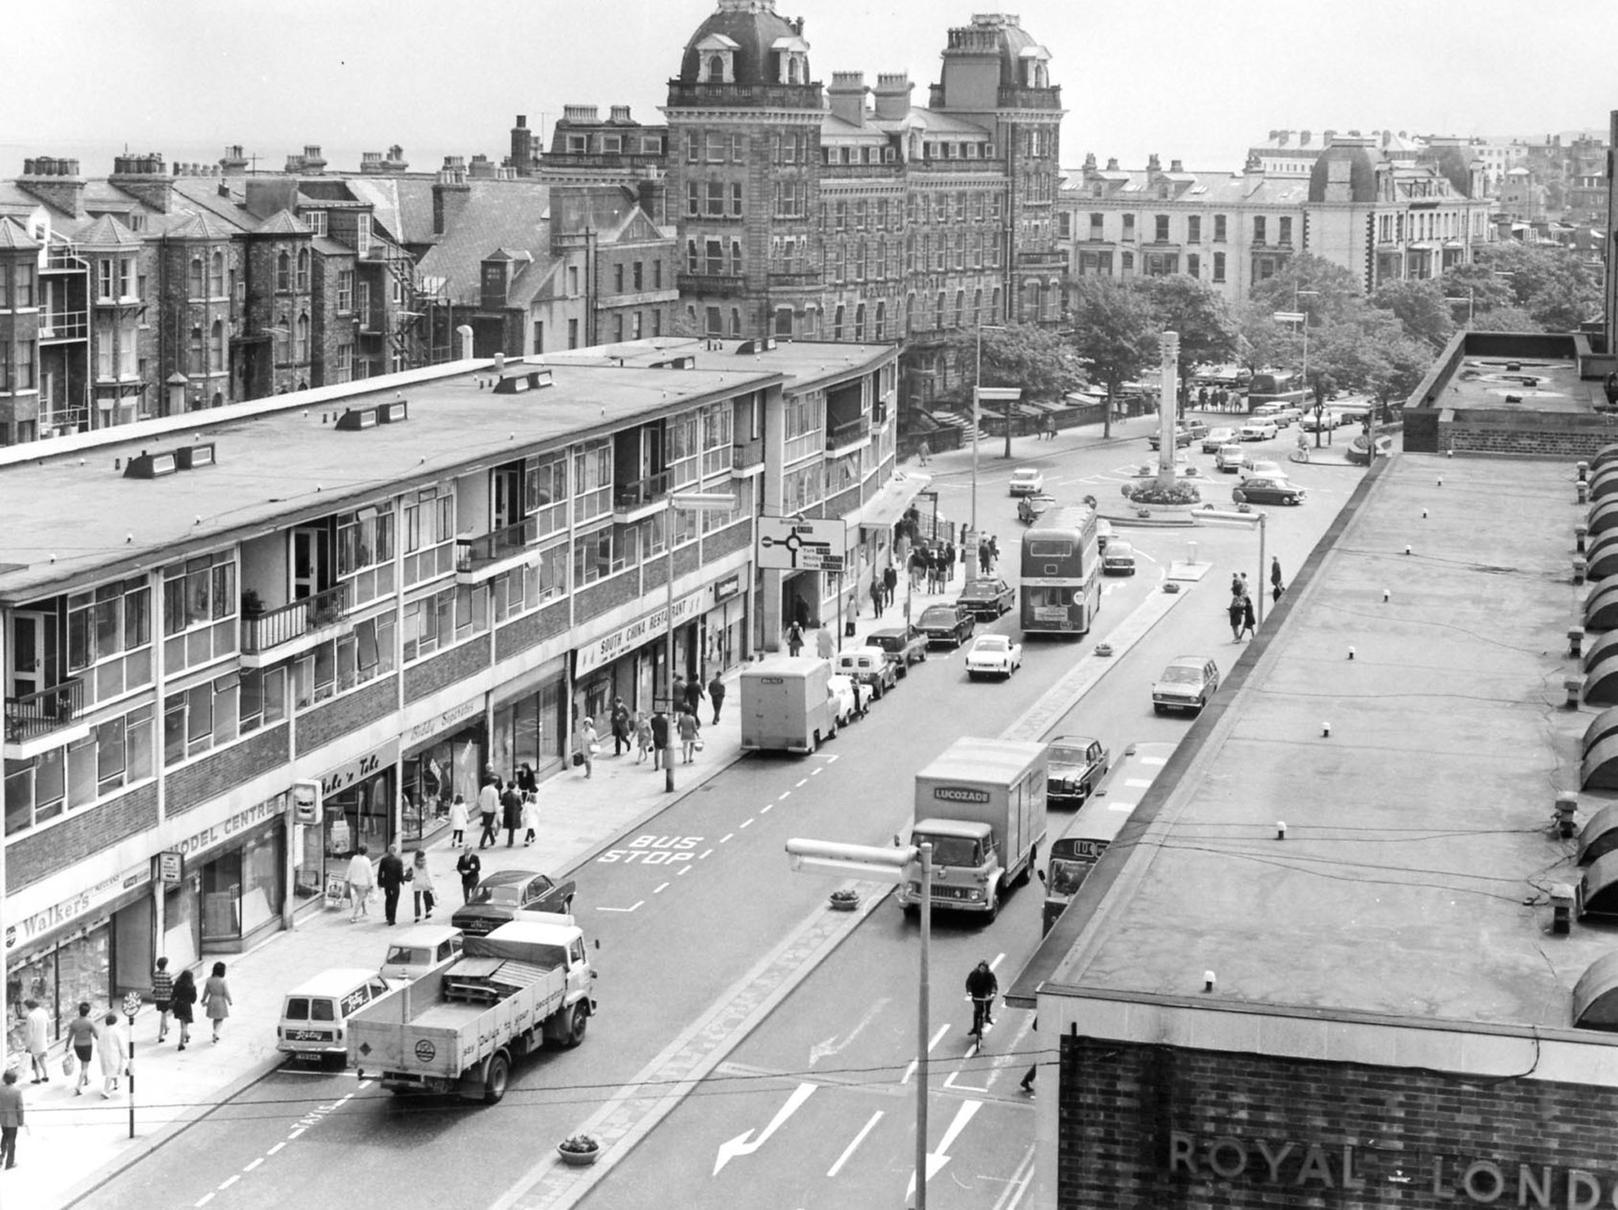 Northway can be seen from above at the turn of the decade, in 1970. The Odeon roundabout which was replaced by traffic lights can be seen in the distance.